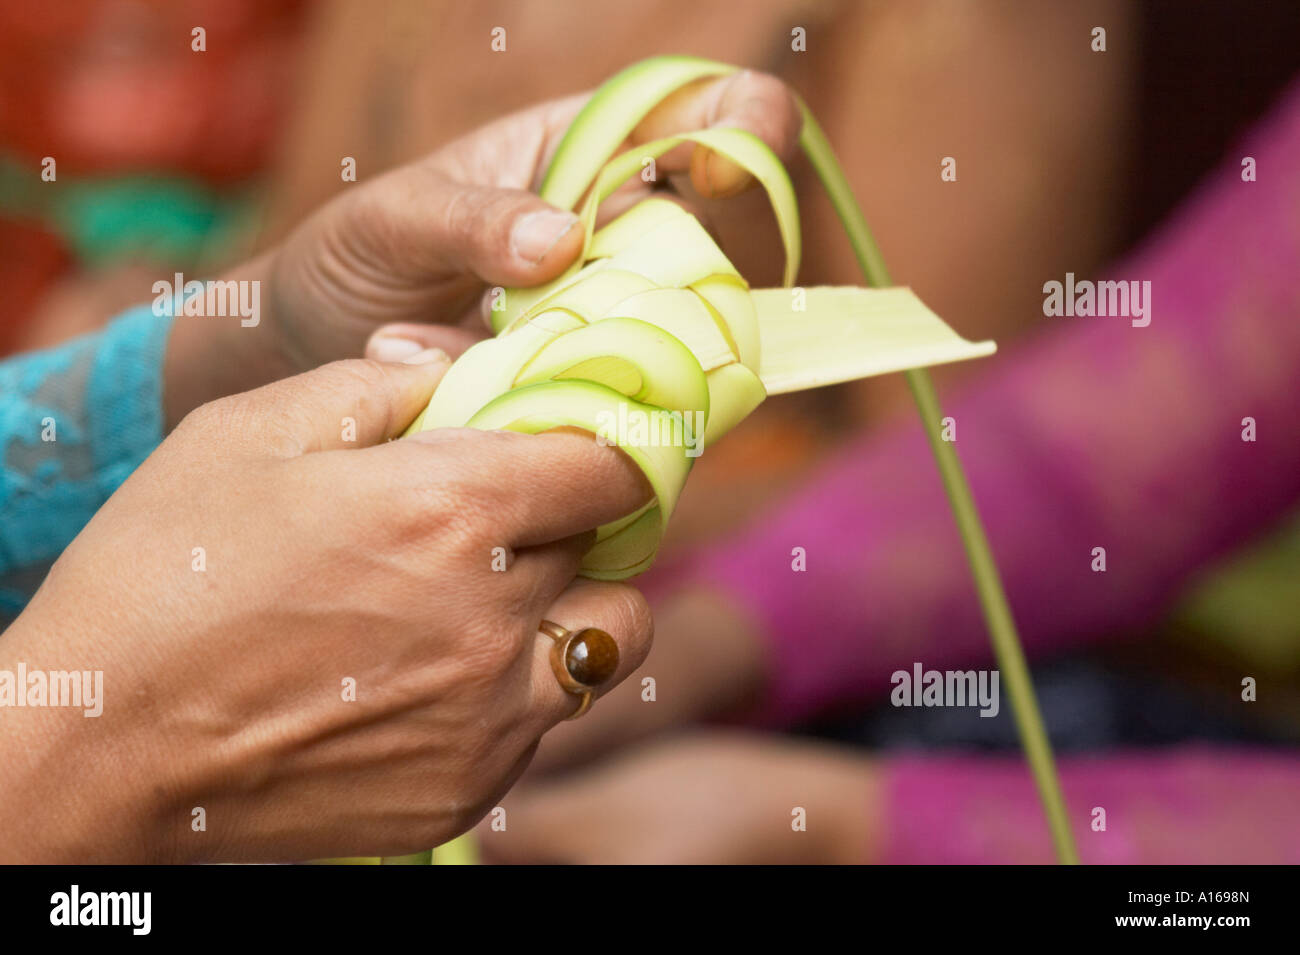 Woman Making Leaf Offering Stock Photo